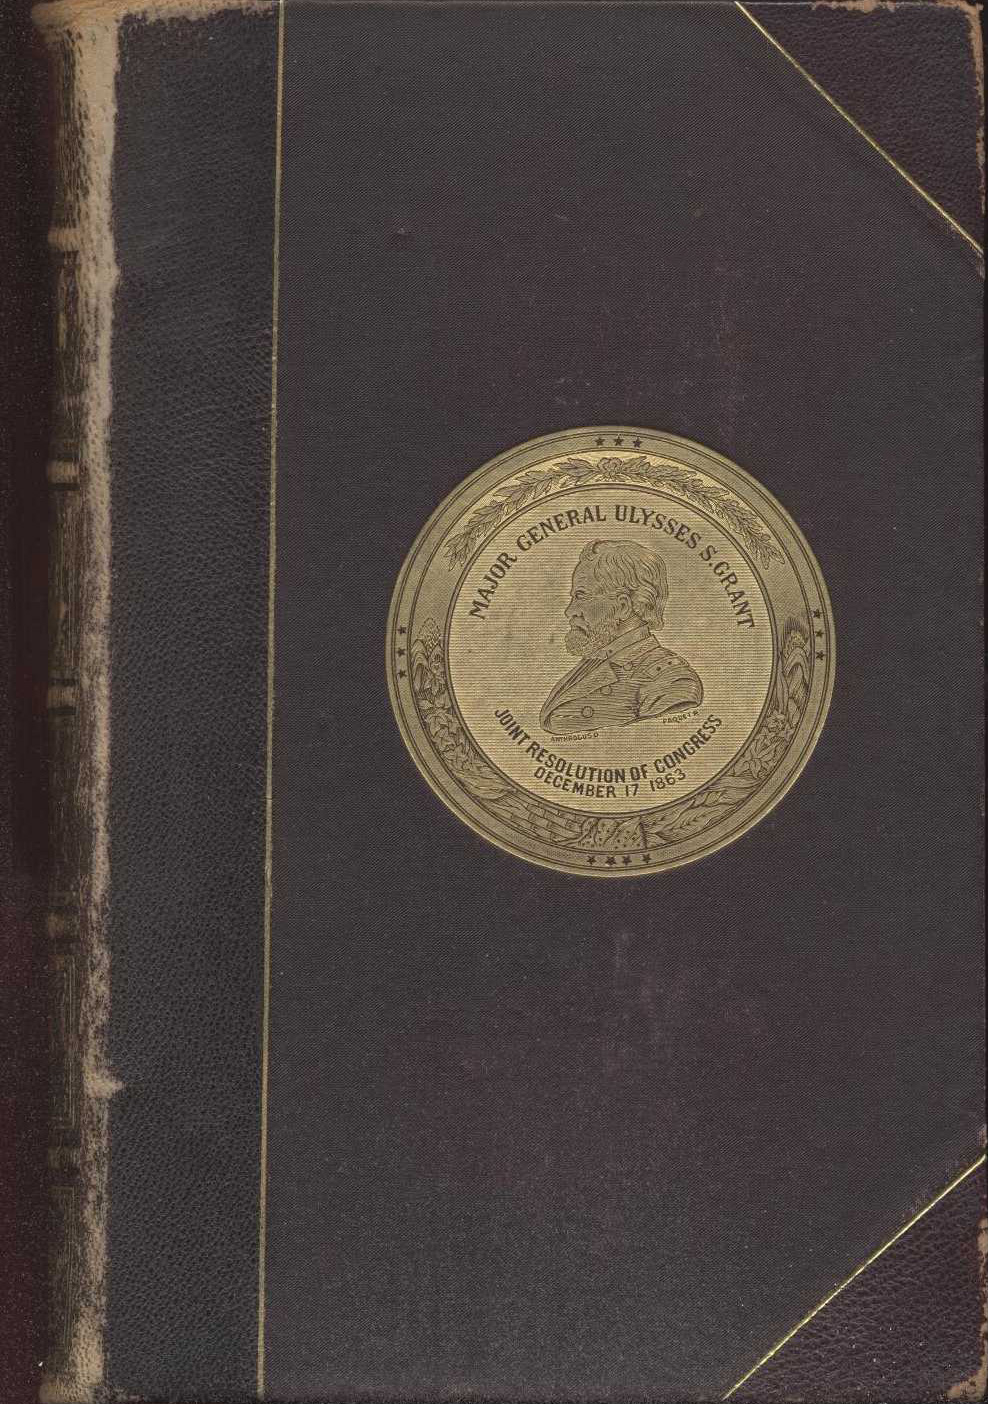 The Project Gutenberg eBook of Memoirs of U. S. Grant, Complete by Ulysses  S. Grant